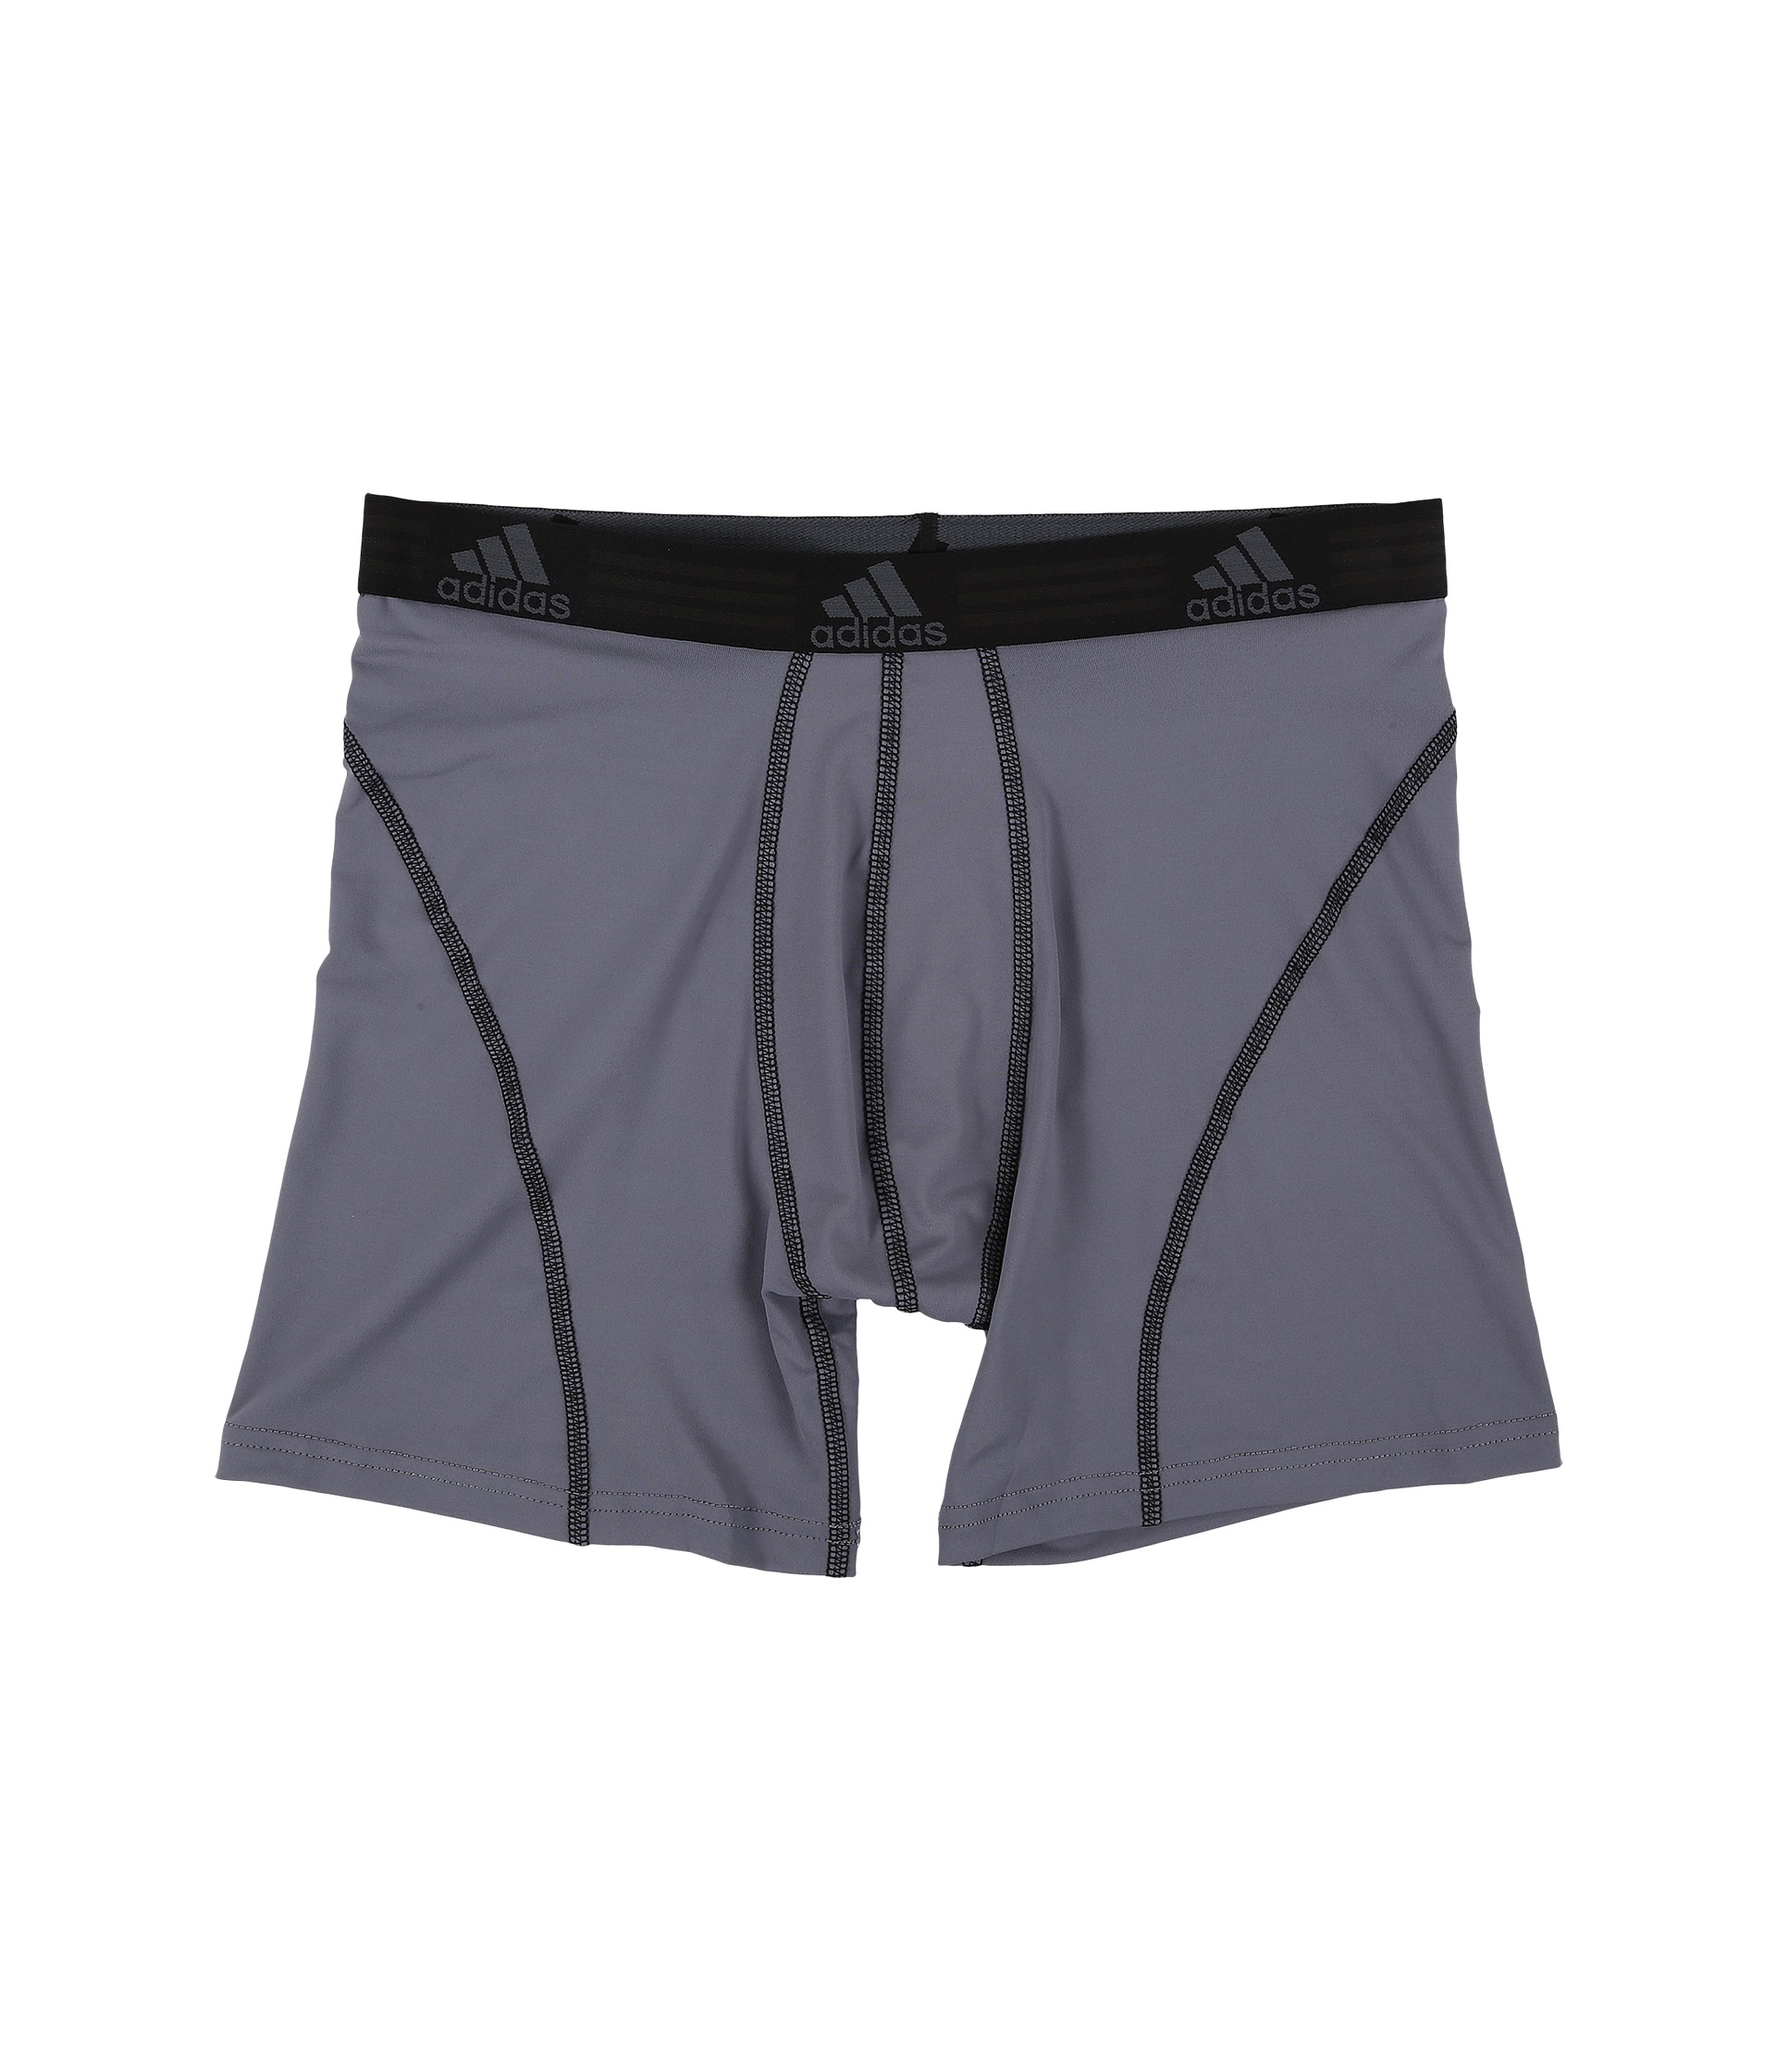 Adidas Climalite Boxer Briefs Size Chart